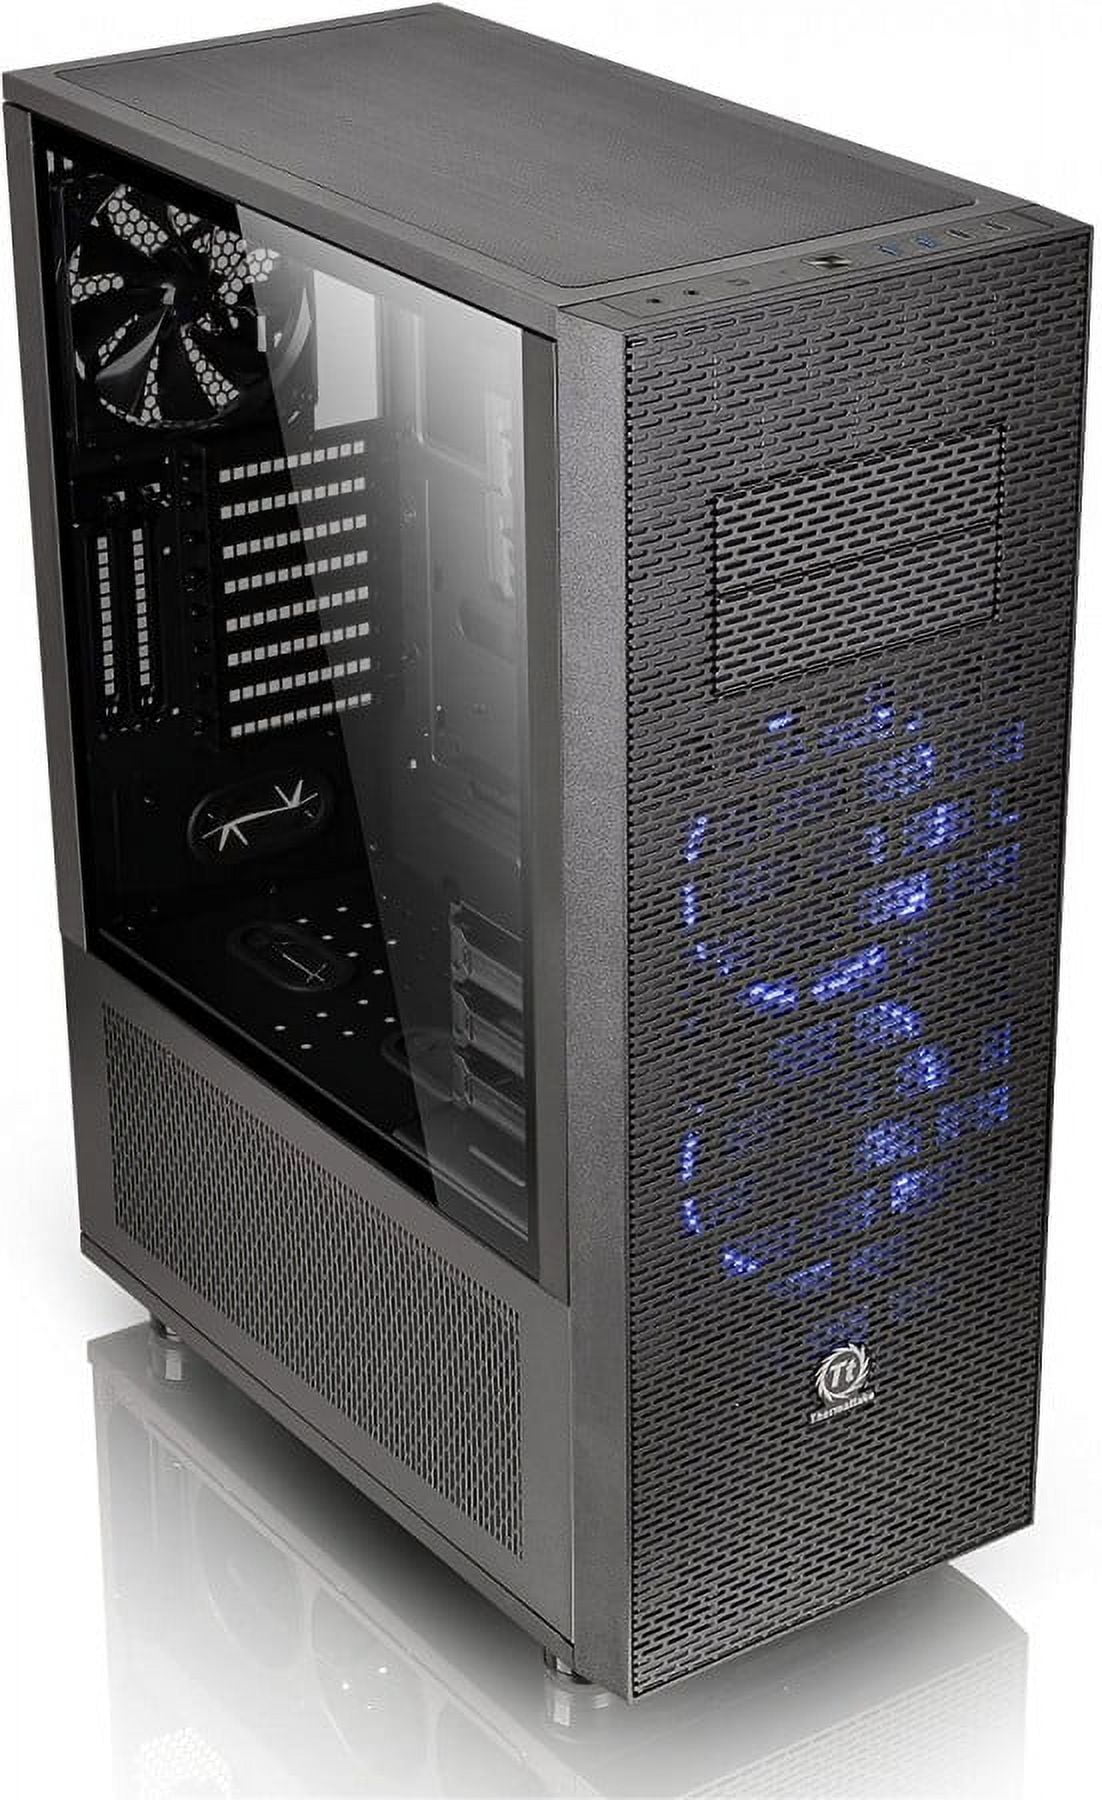 Picture of Thermaltake CA1F800M1N02 Core X71 Tempered Glass Full Tower Chassis